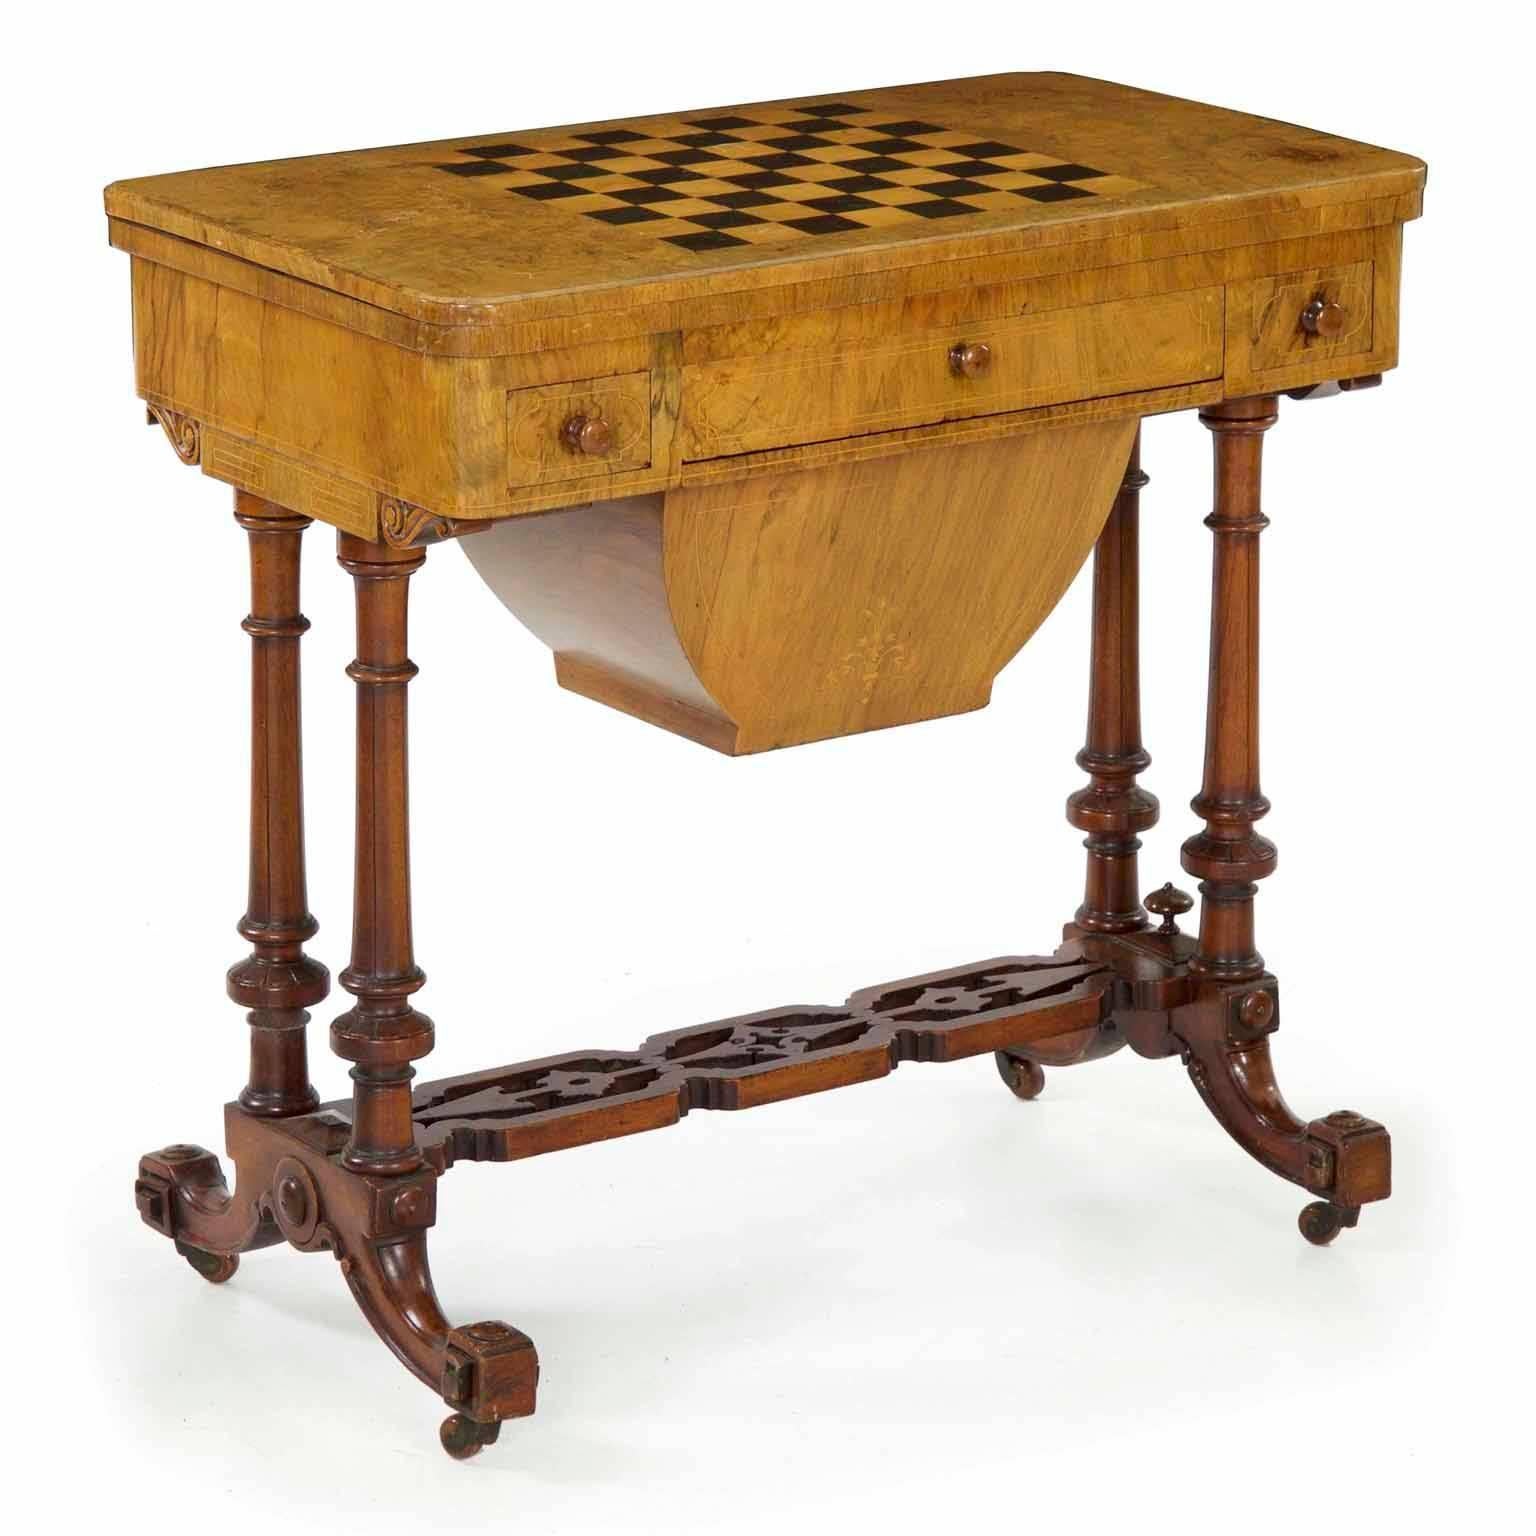 This is such a fun piece with a wealth of uses for enjoyment in the home. Designed first and foremost as a beautiful object, the table is very finely crafted in bleached burl walnut in the top and stained solid walnut in the base; this is